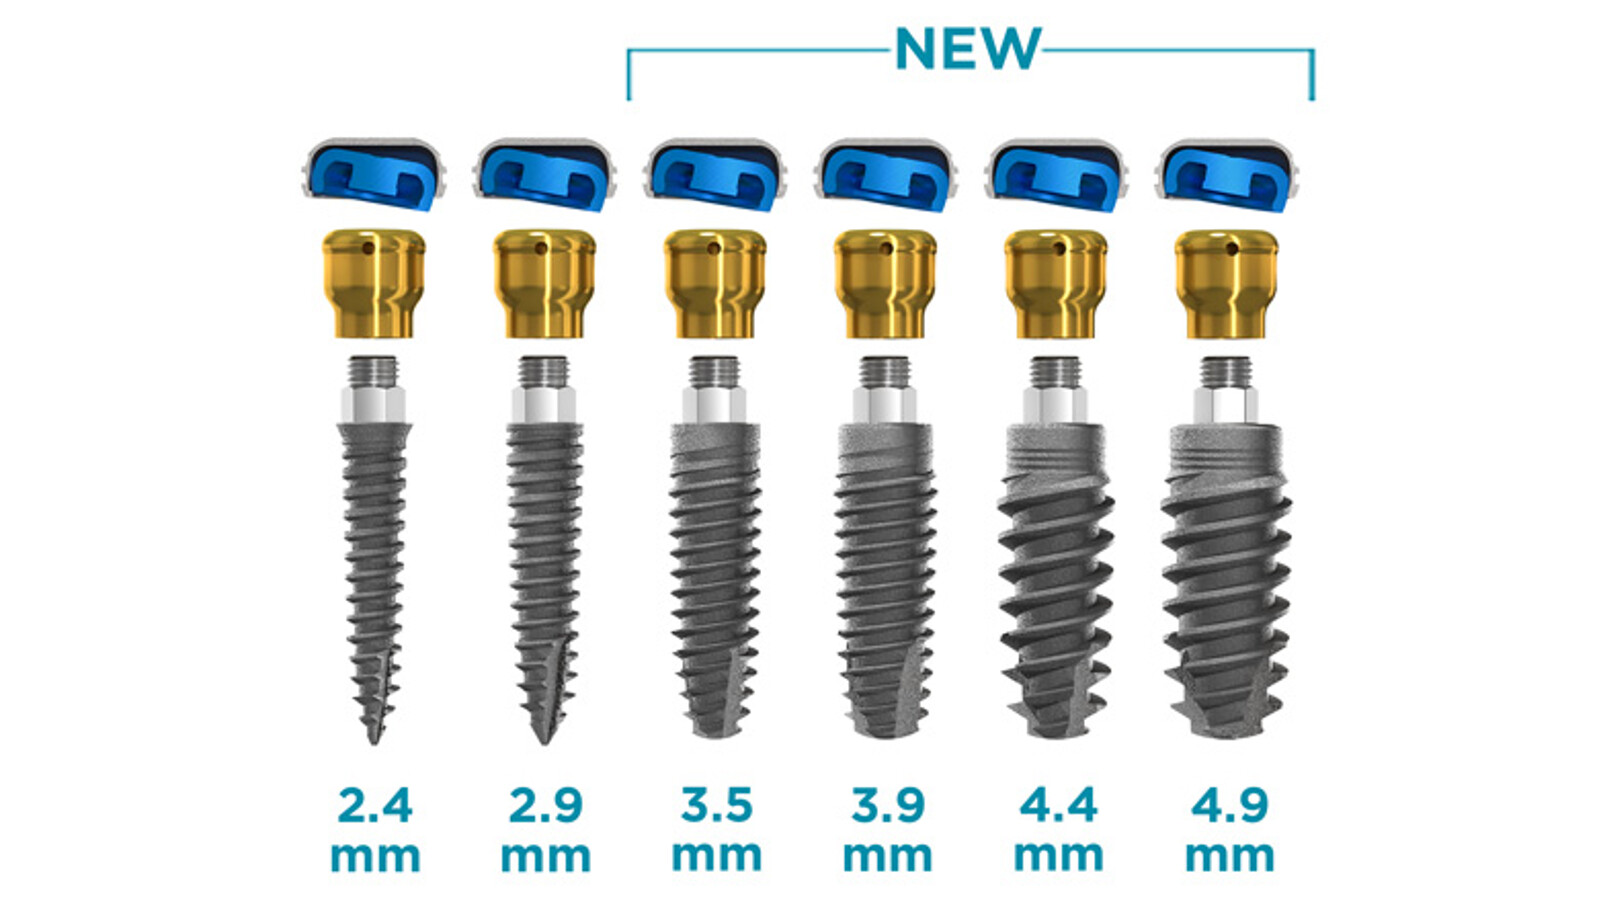 Zest Dental Solutions introduces additional LOCATOR implants diameters